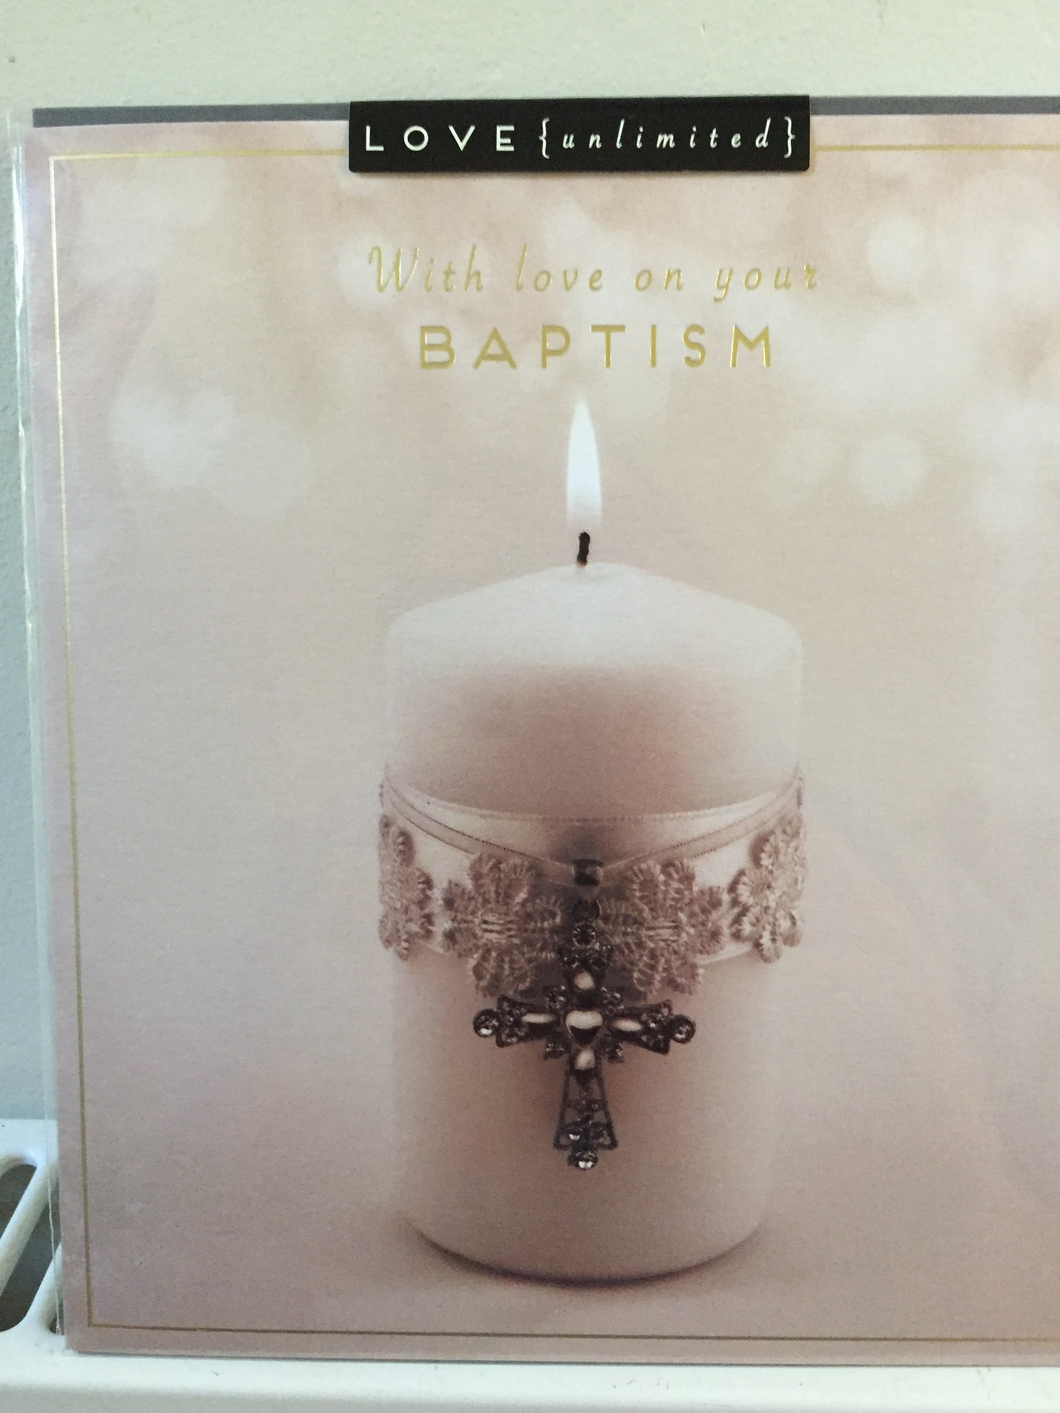 With love on your Baptism - The Alresford Gift Shop